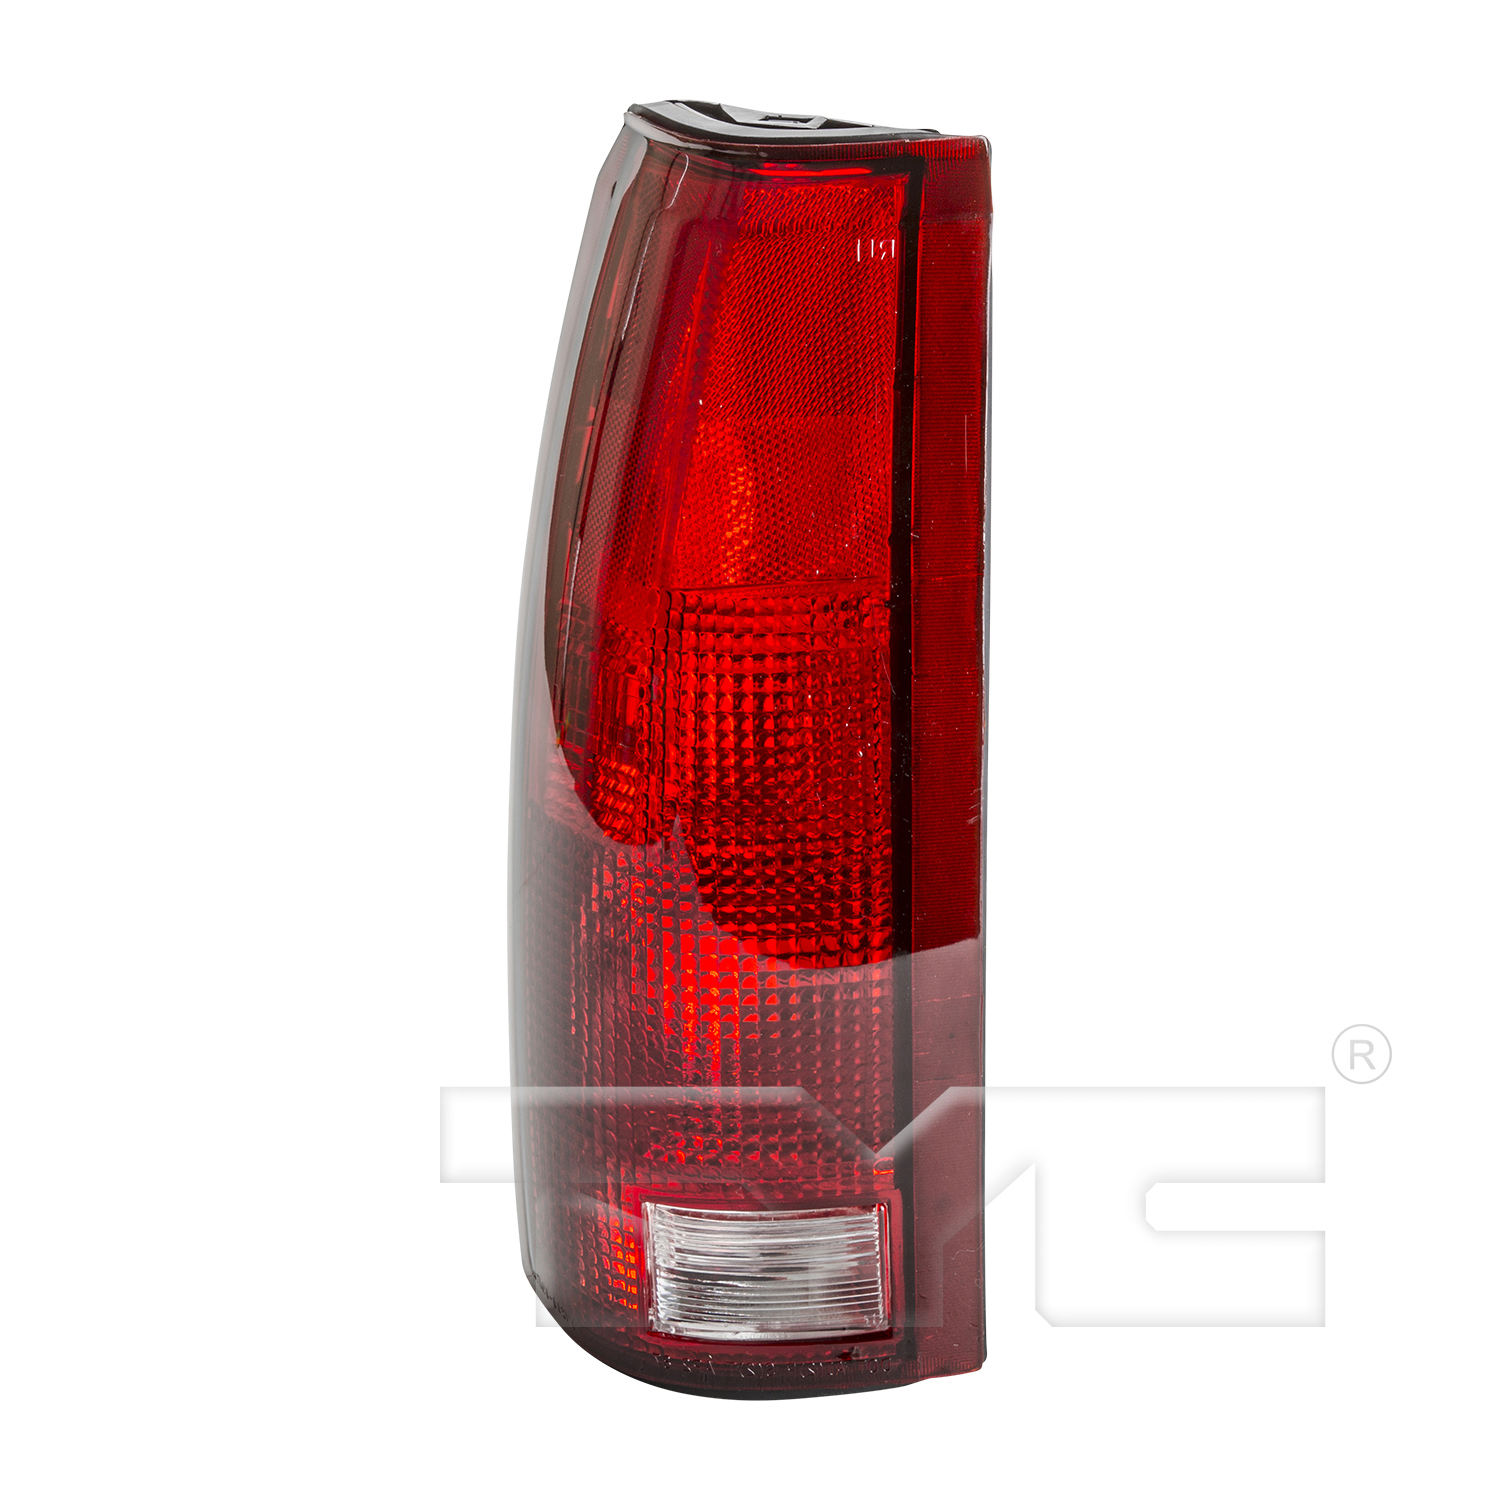 Aftermarket TAILLIGHTS for CADILLAC - ESCALADE, ESCALADE,99-00,LT Taillamp lens